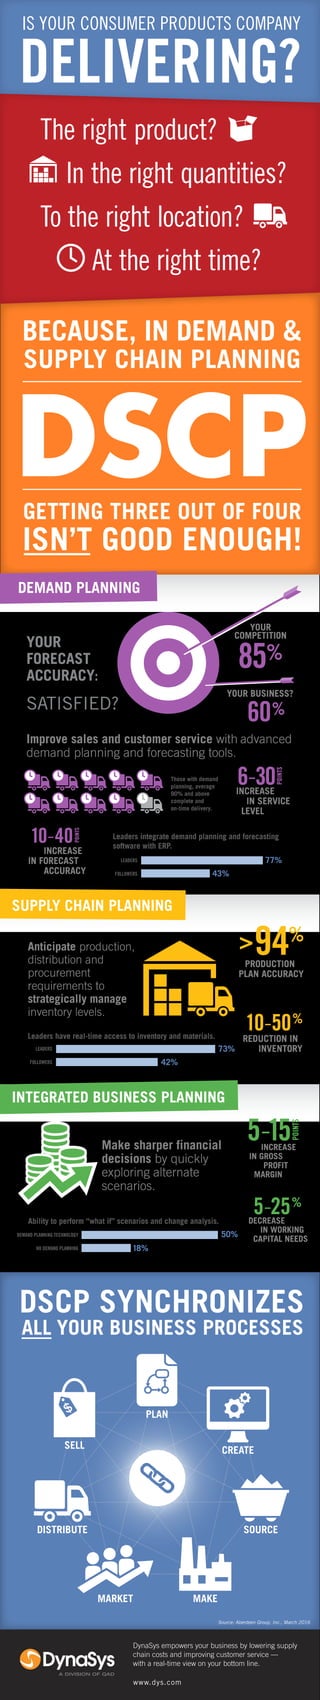 Anticipate production,
distribution and
procurement
requirements to
strategically manage
inventory levels.
INCREASE
IN GROSS
PROFIT
MARGIN
5-15
POINTS
PRODUCTION
PLAN ACCURACY
>94%
REDUCTION IN
INVENTORY
10-50%
Leaders have real-time access to inventory and materials.
FOLLOWERS
LEADERS
42%
73%
Ability to perform “what if” scenarios and change analysis.
NO DEMAND PLANNING
DEMAND PLANNING TECHNOLOGY
18%
50%
Make sharper financial
decisions by quickly
exploring alternate
scenarios.
DECREASE
IN WORKING
CAPITAL NEEDS
5-25%
DSCP
INCREASE
IN FORECAST
ACCURACY
10-40
POINTS
INCREASE
IN SERVICE
LEVEL
6-30
POINTS
Leaders integrate demand planning and forecasting
software with ERP.
FOLLOWERS 43%
LEADERS 77%
Those with demand
planning, average
90% and above
complete and
on-time delivery.
YOUR
FORECAST
ACCURACY:
SATISFIED?
Improve sales and customer service with advanced
demand planning and forecasting tools.
BECAUSE, IN DEMAND &
SUPPLY CHAIN PLANNING
IS YOUR CONSUMER PRODUCTS COMPANY
DEMAND PLANNING
SUPPLY CHAIN PLANNING
INTEGRATED BUSINESS PLANNING
$
SELL
PLAN
CREATE
SOURCE
MARKET
DISTRIBUTE
MAKE
YOUR
COMPETITION
YOUR BUSINESS?
85%
60%
DSCP SYNCHRONIZES
ALL YOUR BUSINESS PROCESSES
Source: Aberdeen Group, Inc., March 2016
DELIVERING?
The right product?
In the right quantities?
To the right location?
At the right time?
GETTING THREE OUT OF FOUR
ISN’T GOOD ENOUGH!
DynaSys empowers your business by lowering supply
chain costs and improving customer service —
with a real-time view on your bottom line.
www.dys.com
 